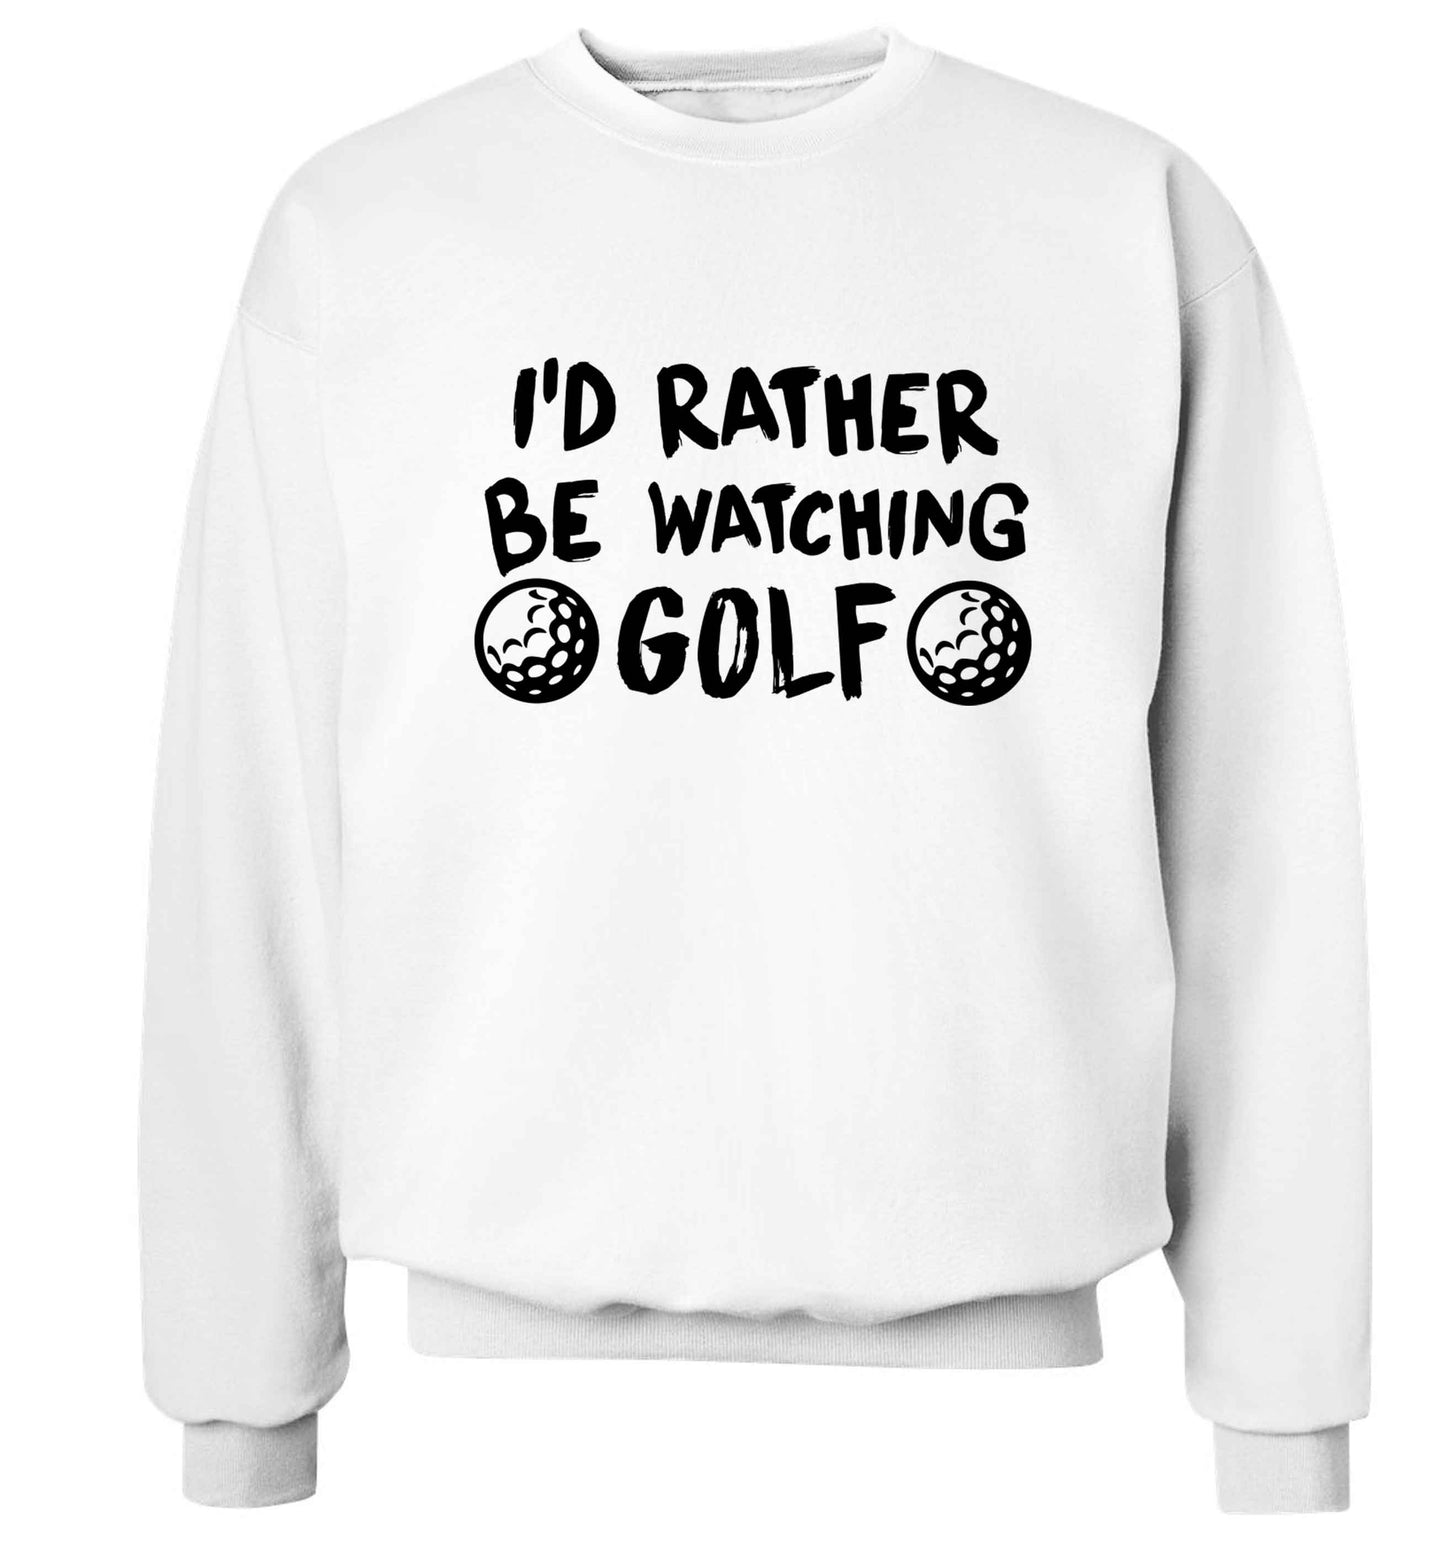 I'd rather be watching golf Adult's unisex white Sweater 2XL